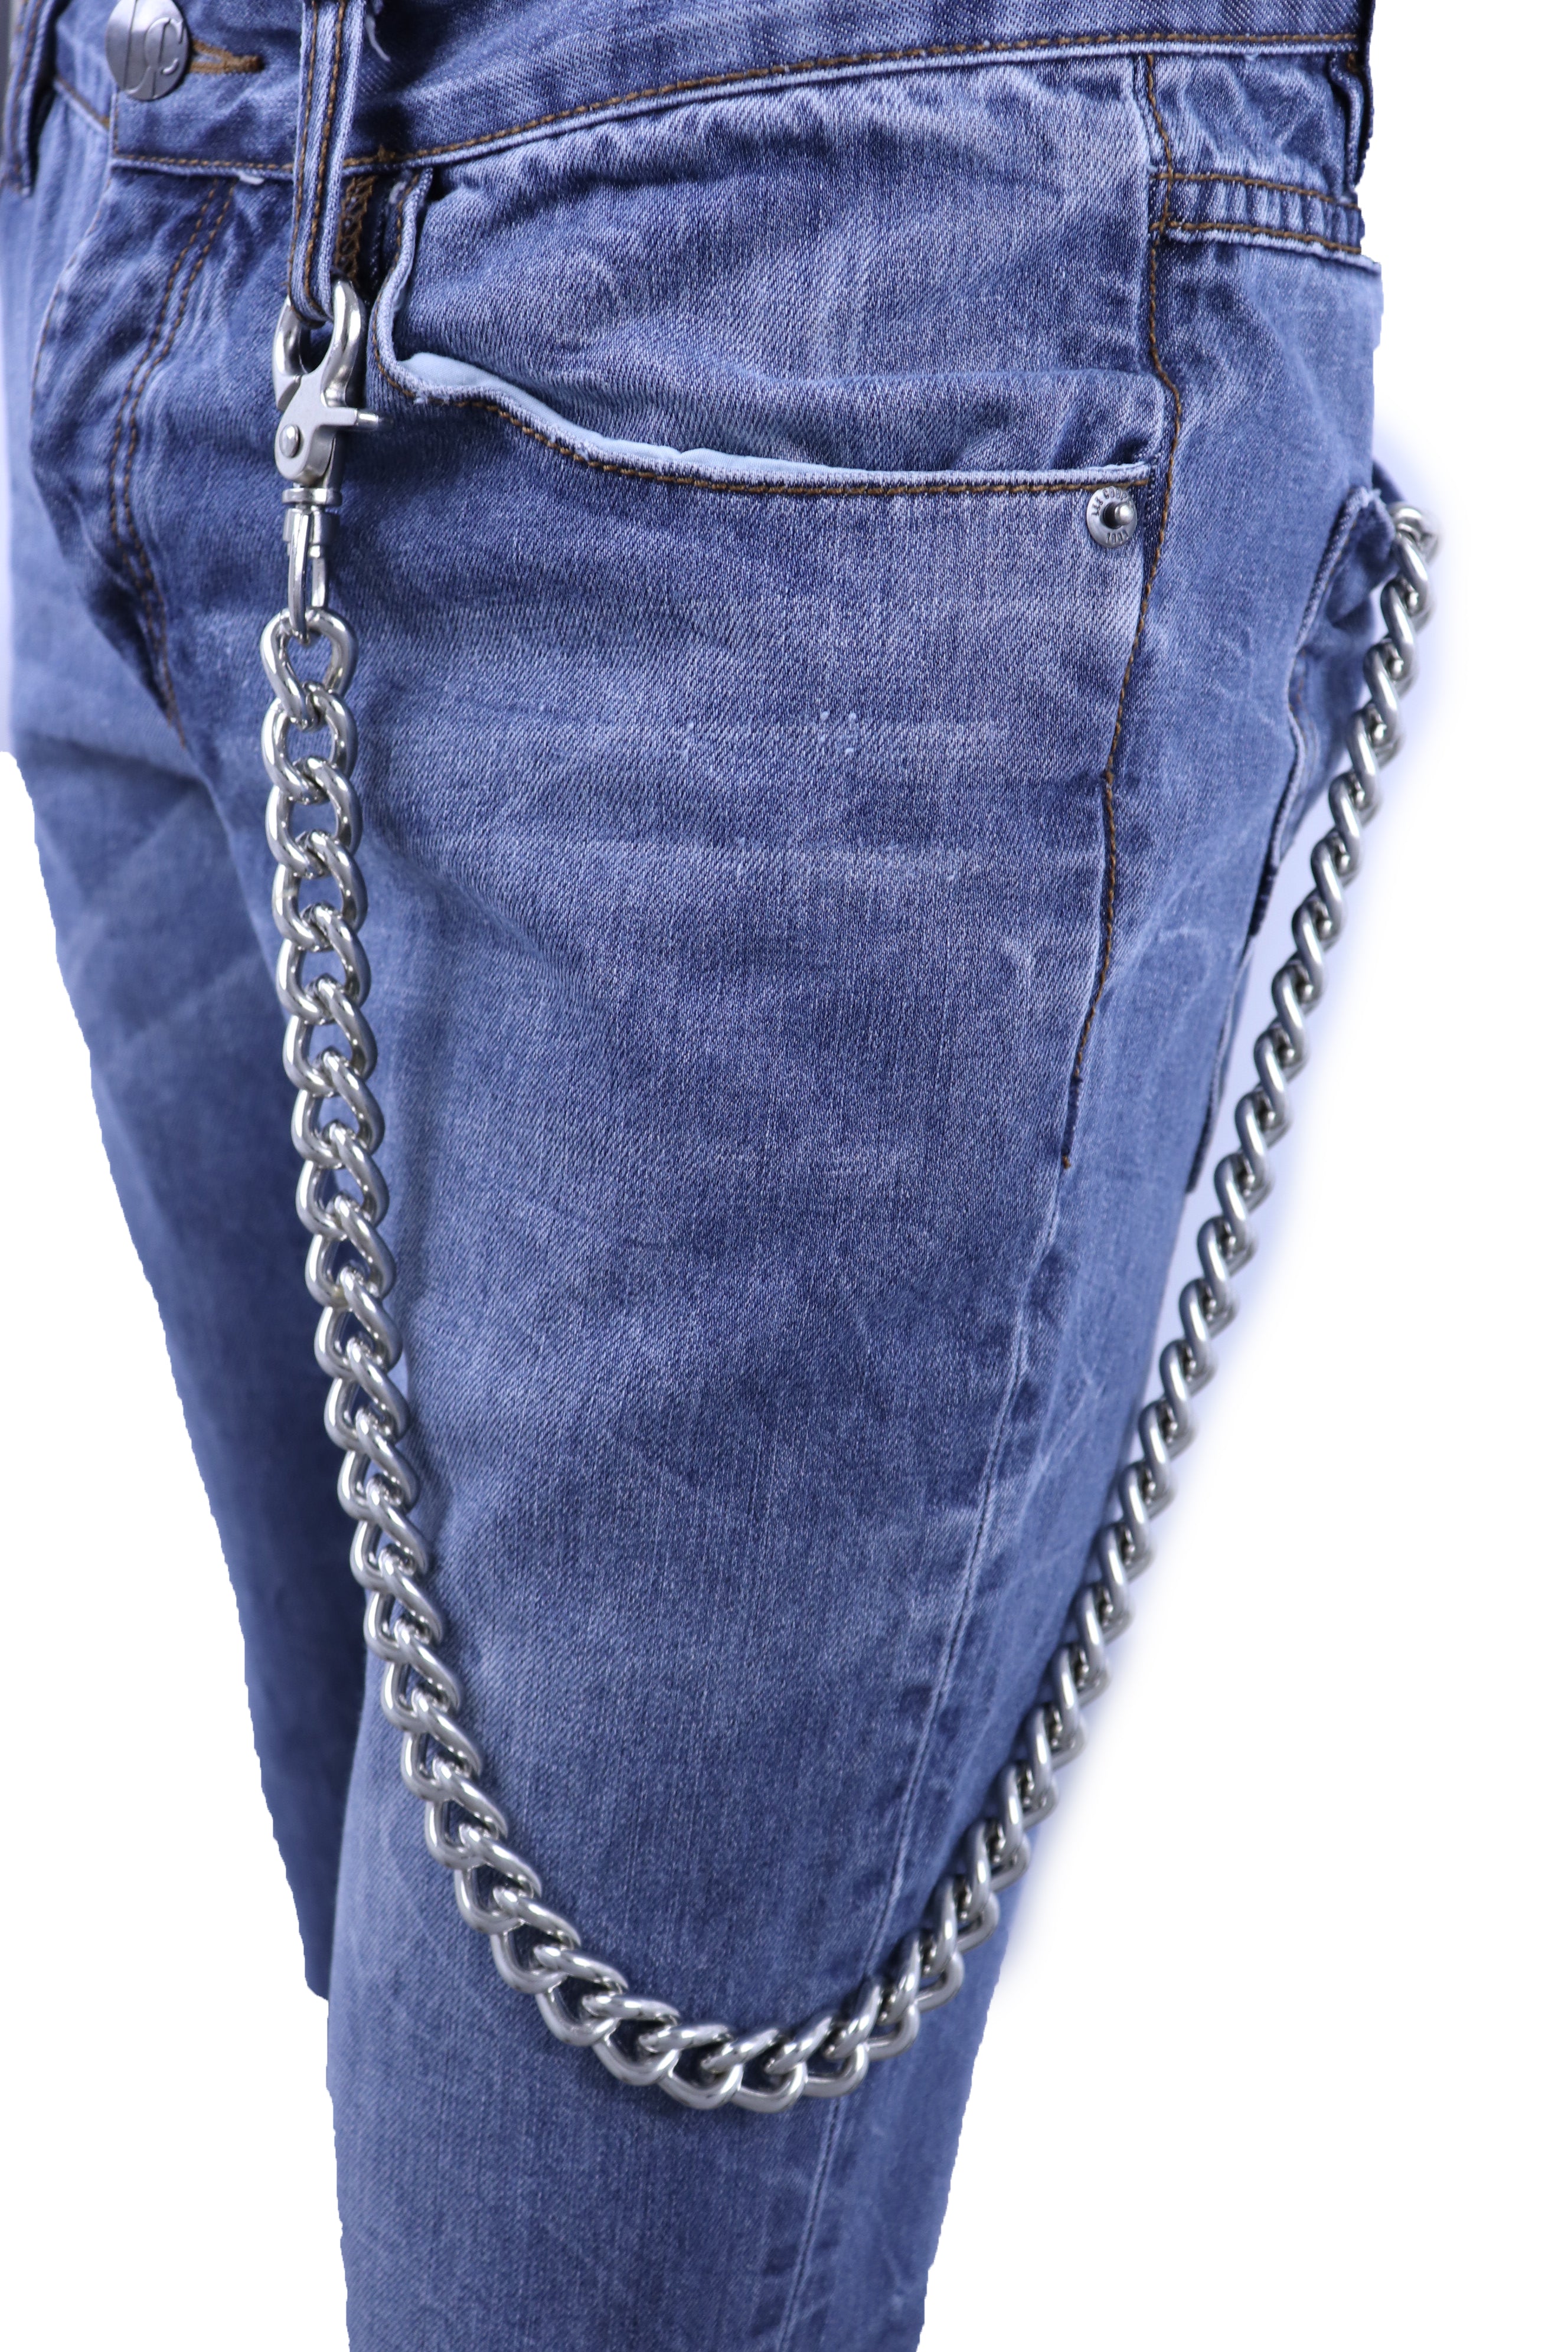 Silver Metal Short Wallet Chains KeyChain Jeans Biker Strong New Men S –  alwaystyle4you